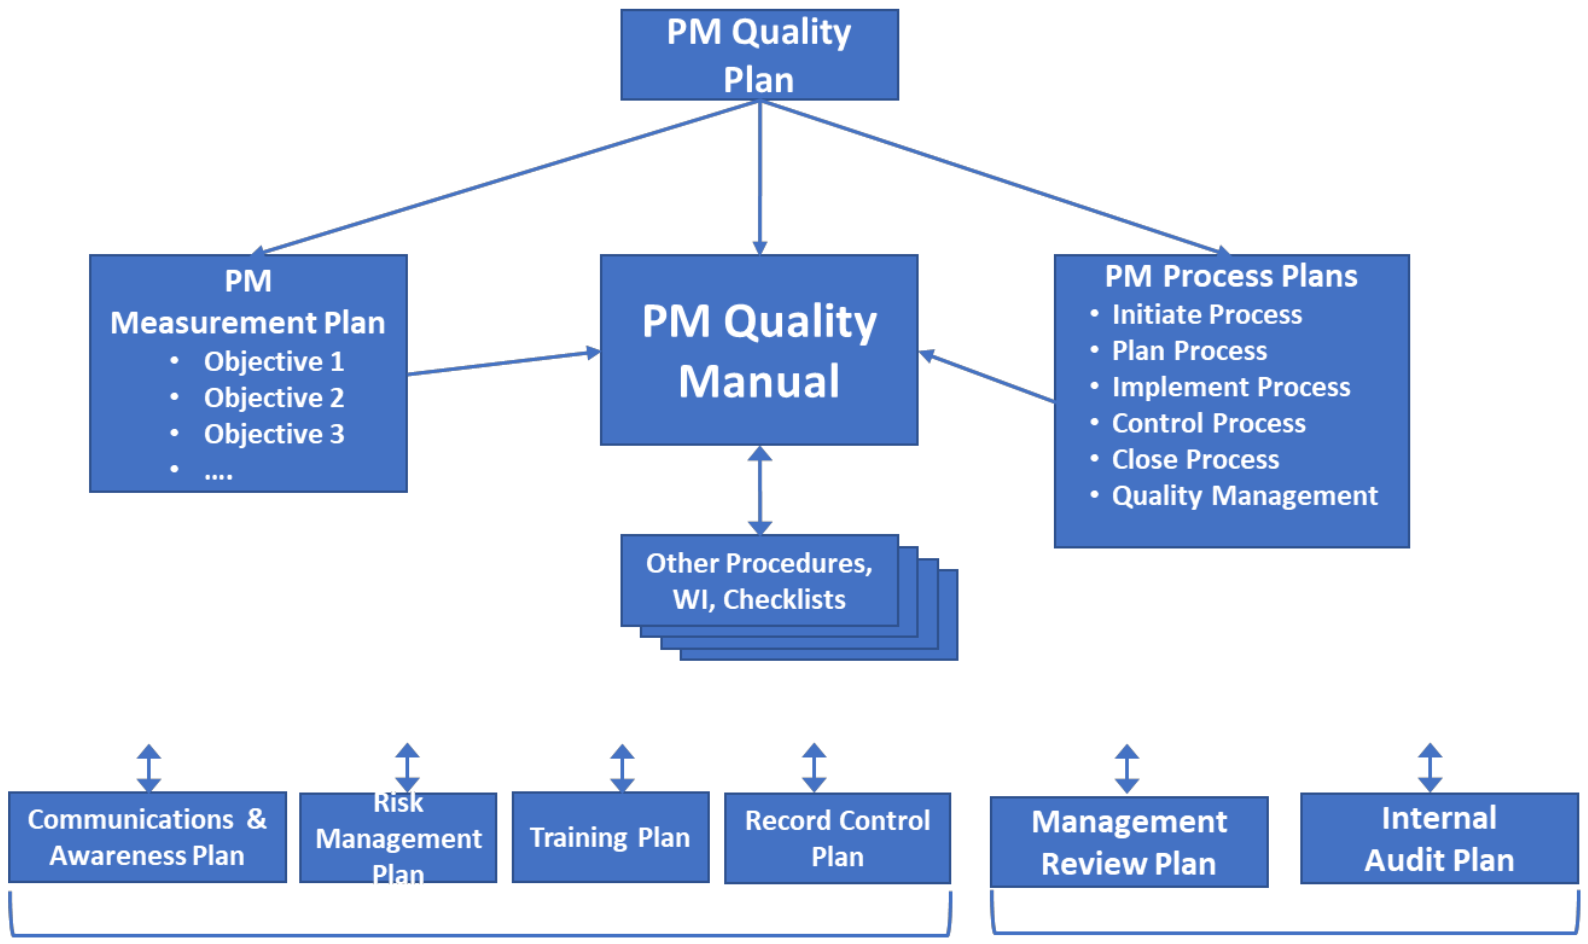 Using ISO 9001 and ISO 21500